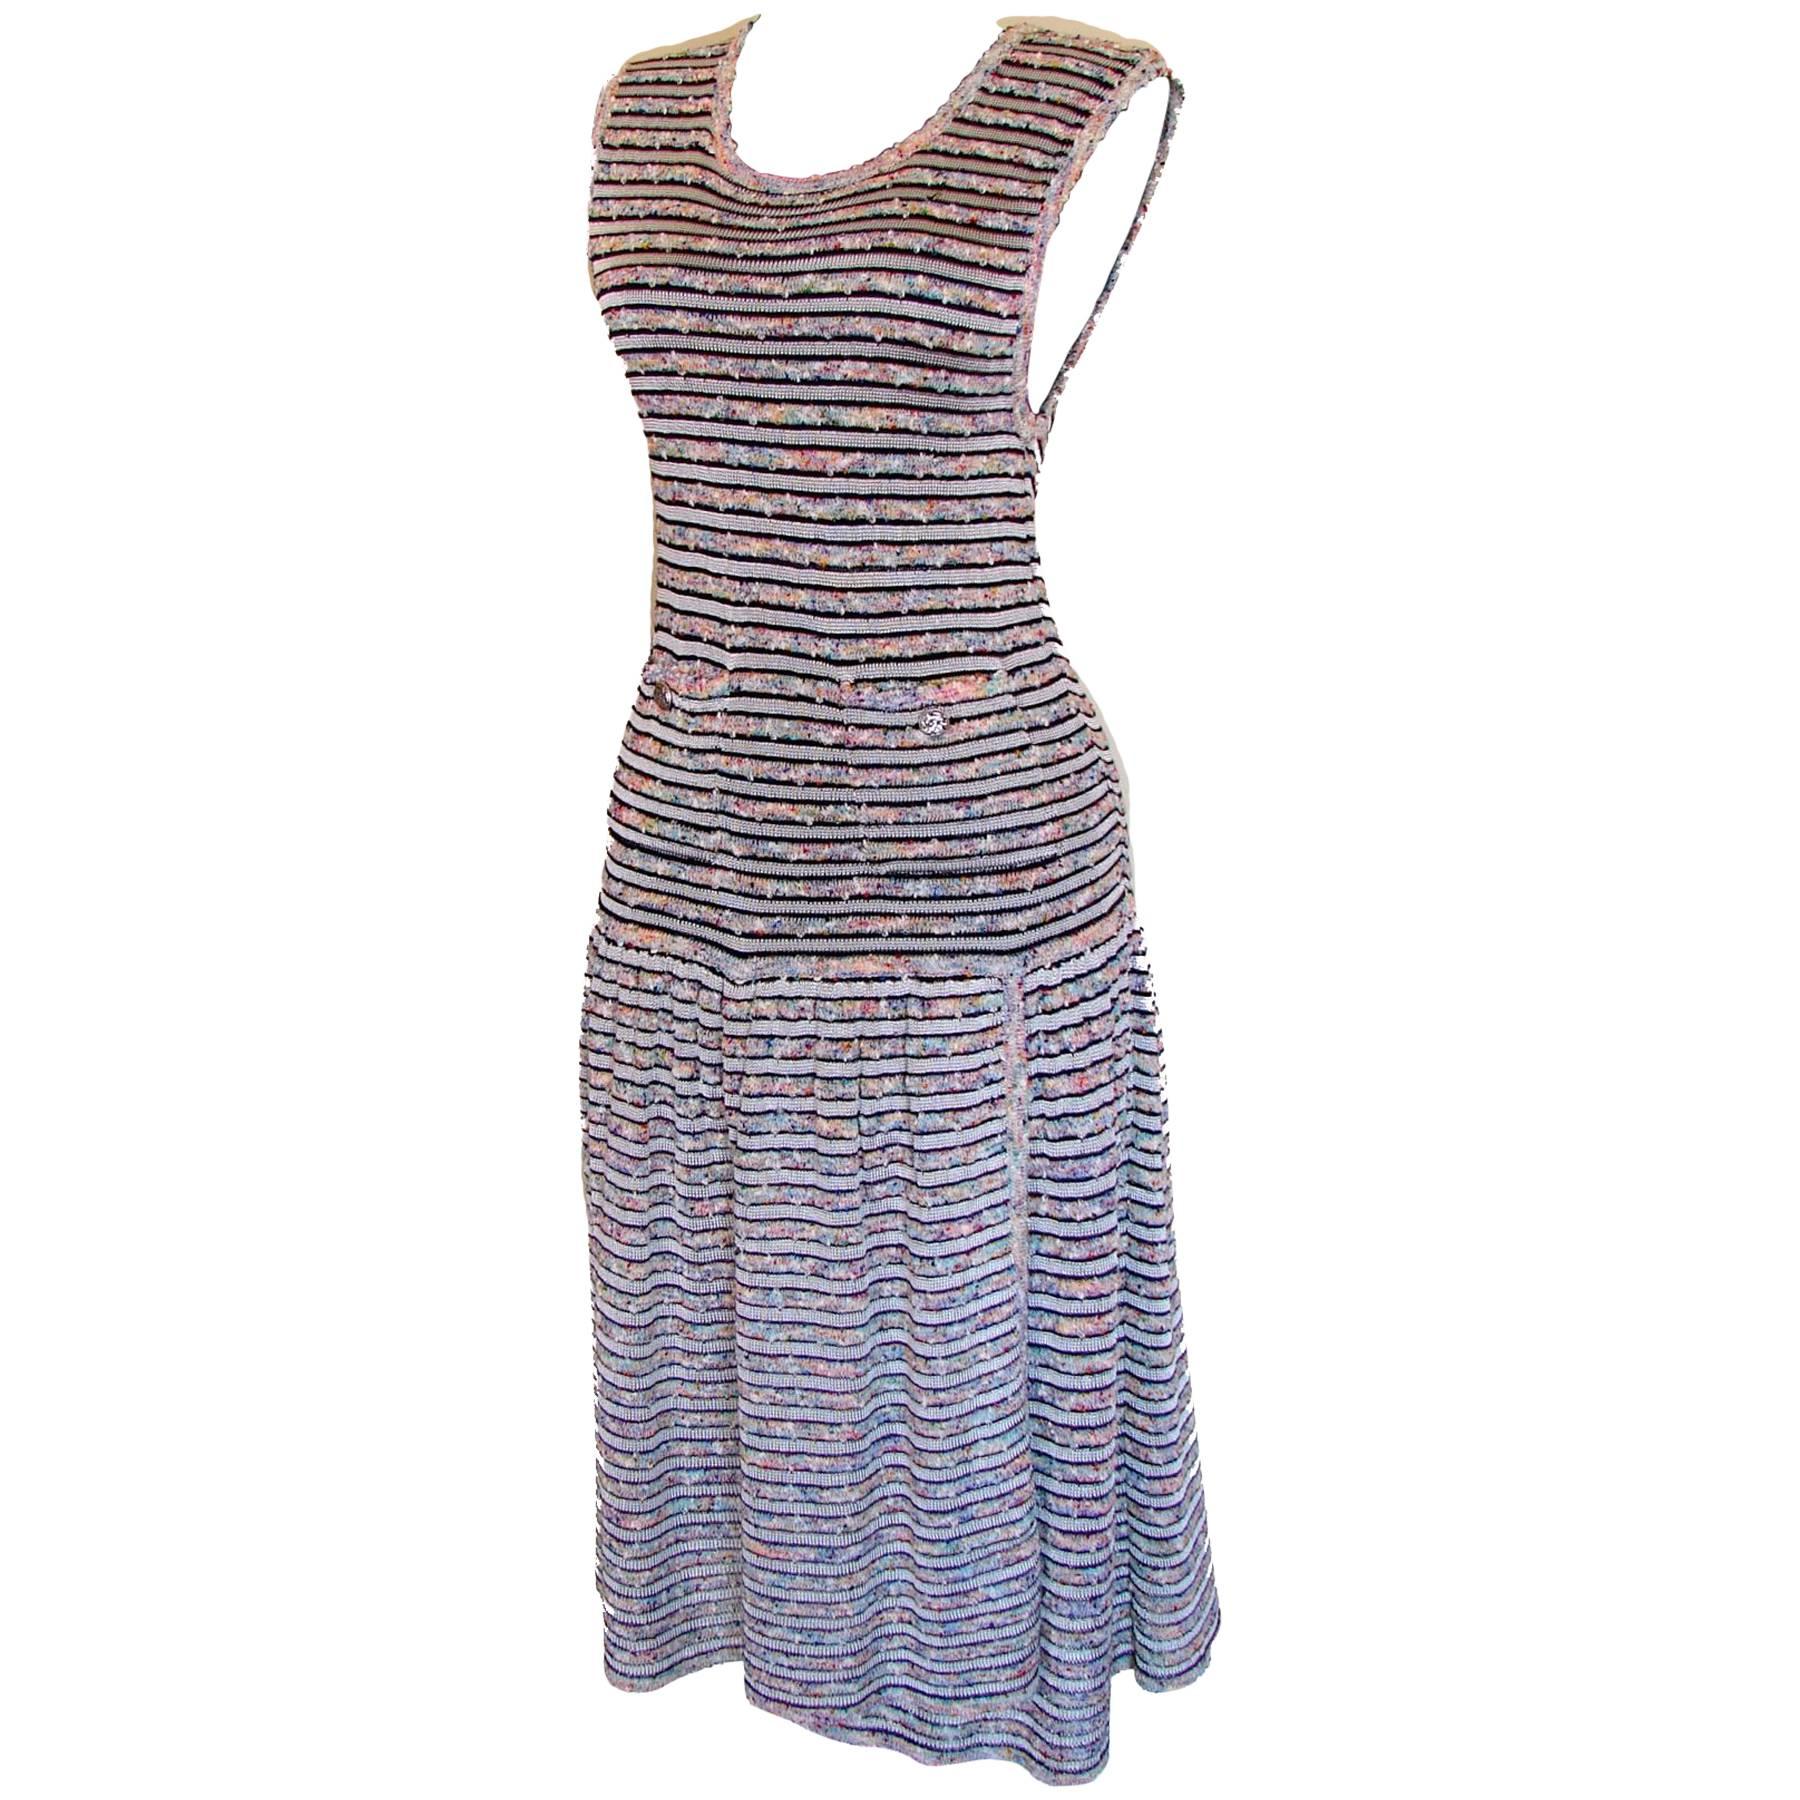 Chanel 11P Boucle Striped Knit Dress New with Tags Size 44 